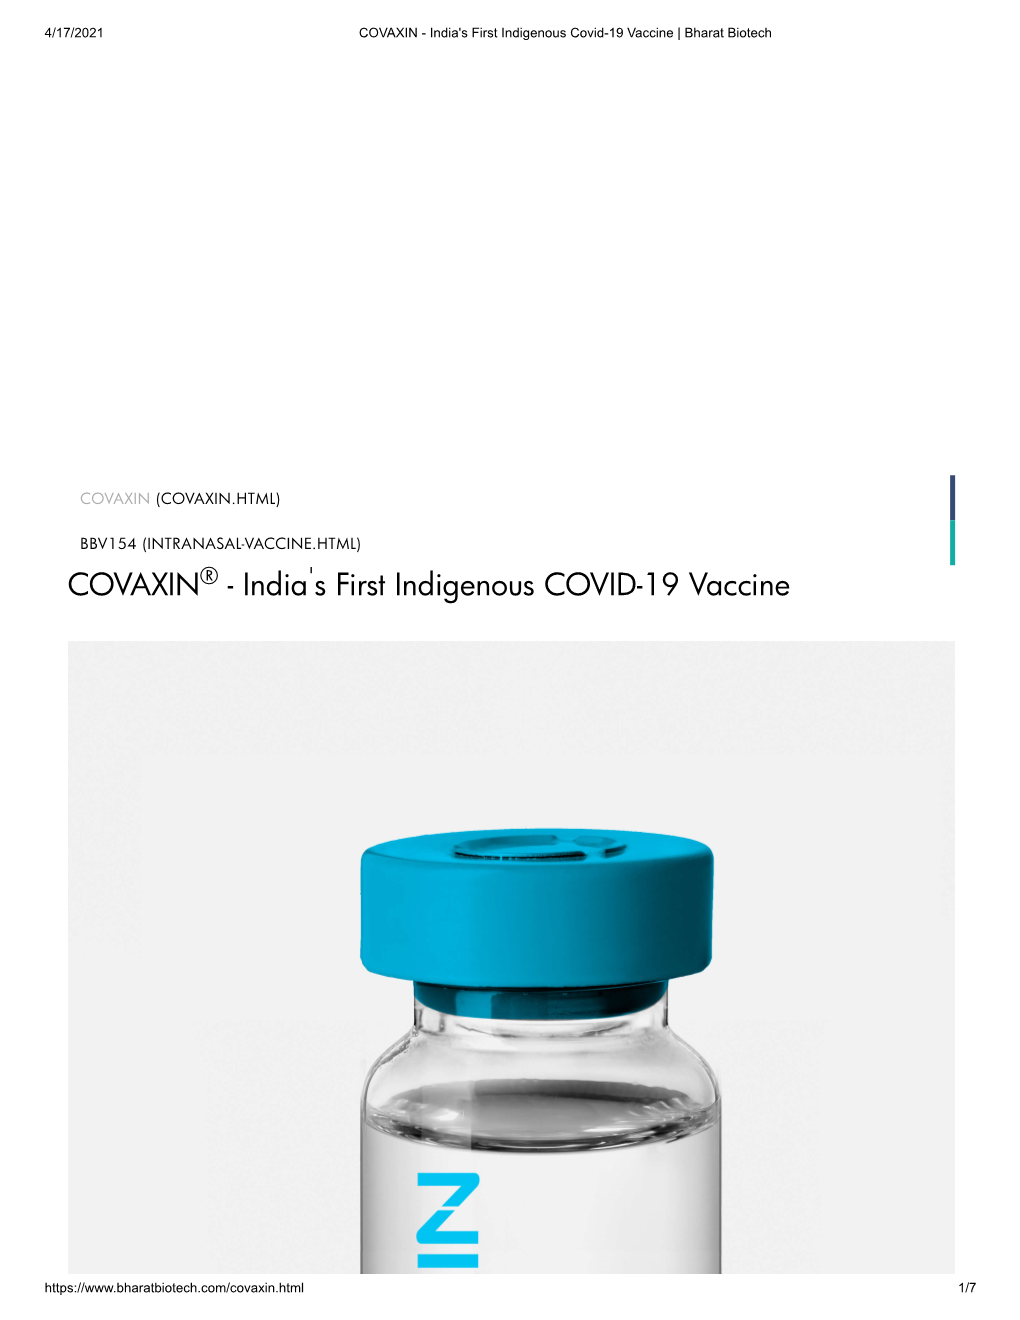 India S First Indigenous COVID-19 Vaccine